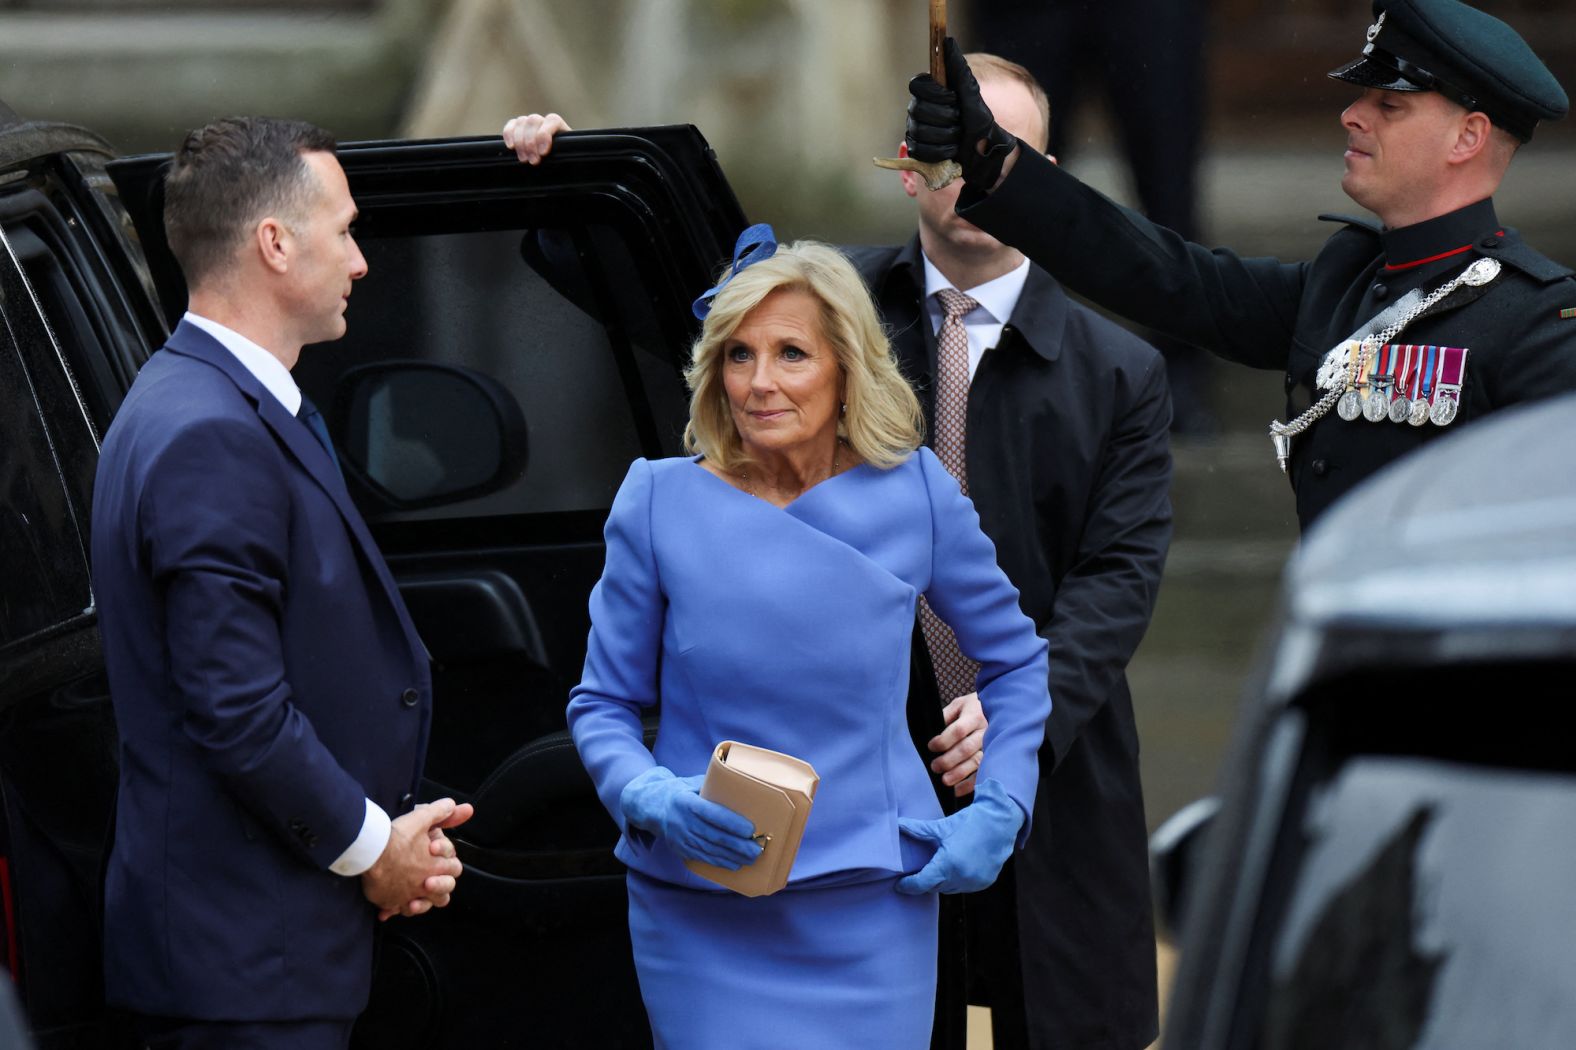 Jill Biden, first lady of the United States, arrives at Westminster Abbey. Biden, <a href="index.php?page=&url=https%3A%2F%2Fwww.cnn.com%2Fuk%2Flive-news%2Fking-charles-iii-coronation-ckc-intl-gbr%2Fh_054e67e7c5ebf898814c9b3c1126fb9f" target="_blank">who led the US delegation</a>, traveled with her granddaughter Finnegan Biden.